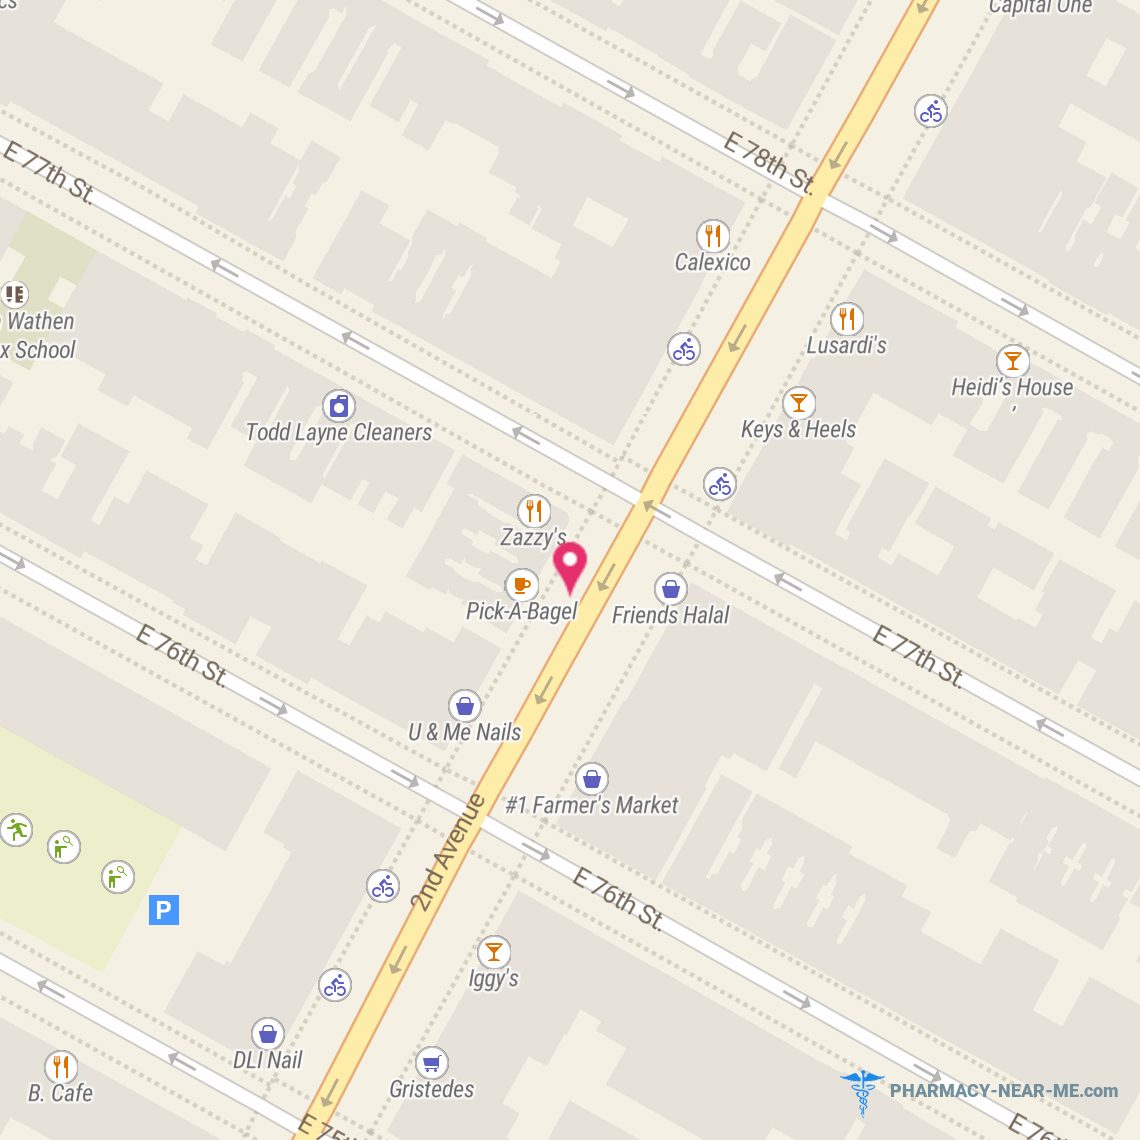 RITE AID PHARMACY 04215 - Pharmacy Hours, Phone, Reviews & Information: 1535 2nd Avenue, NY, New York 10075, United States